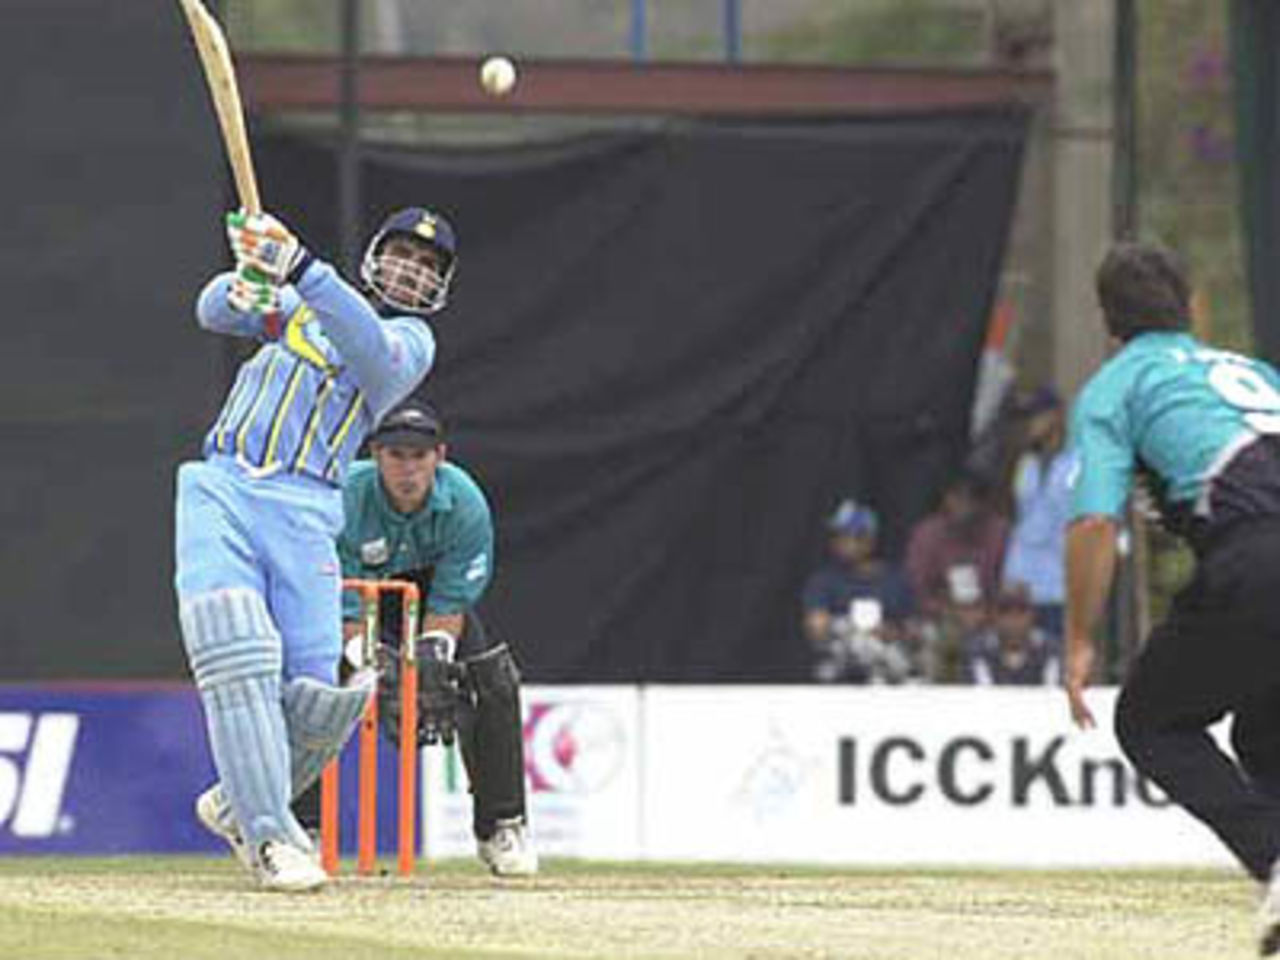 Ganguly lifts the ball past the bowler for yet another six, ICC KnockOut, 2000/01, Final, India v New Zealand, Gymkhana Club Ground, Nairobi, 15 October 2000.